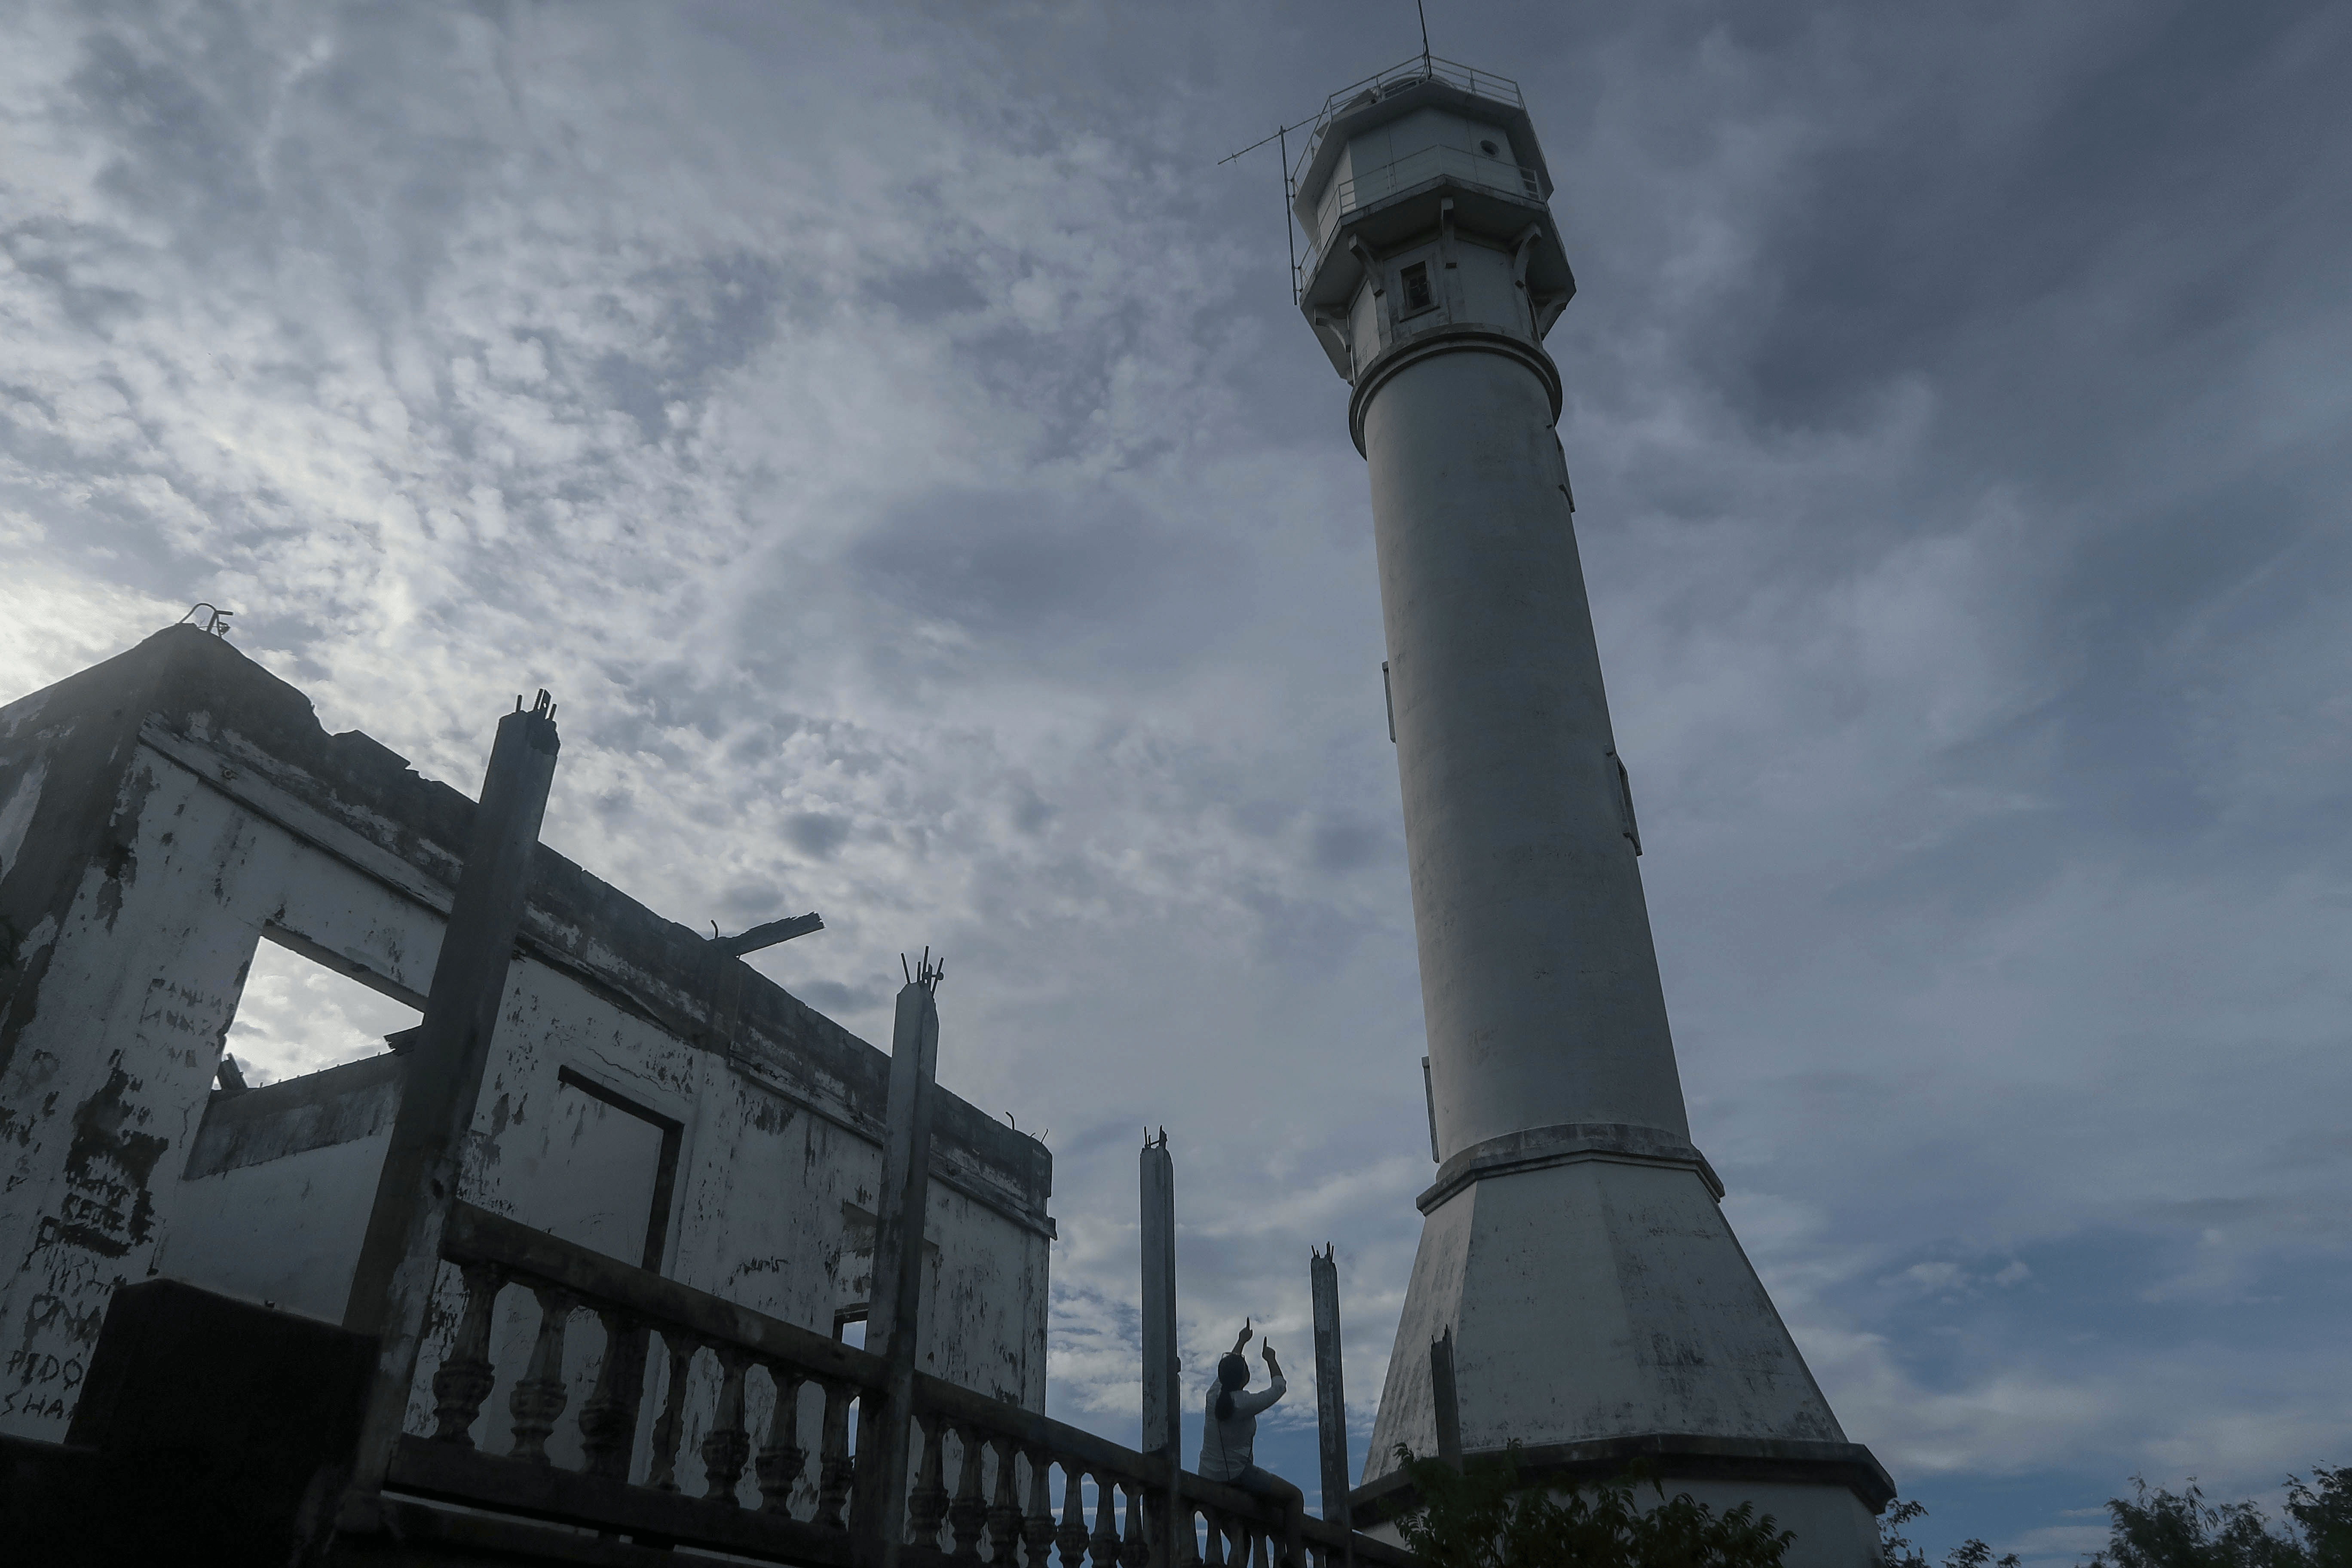 cape bolinao lighthouse in pangasinan province philippines beautiful photo